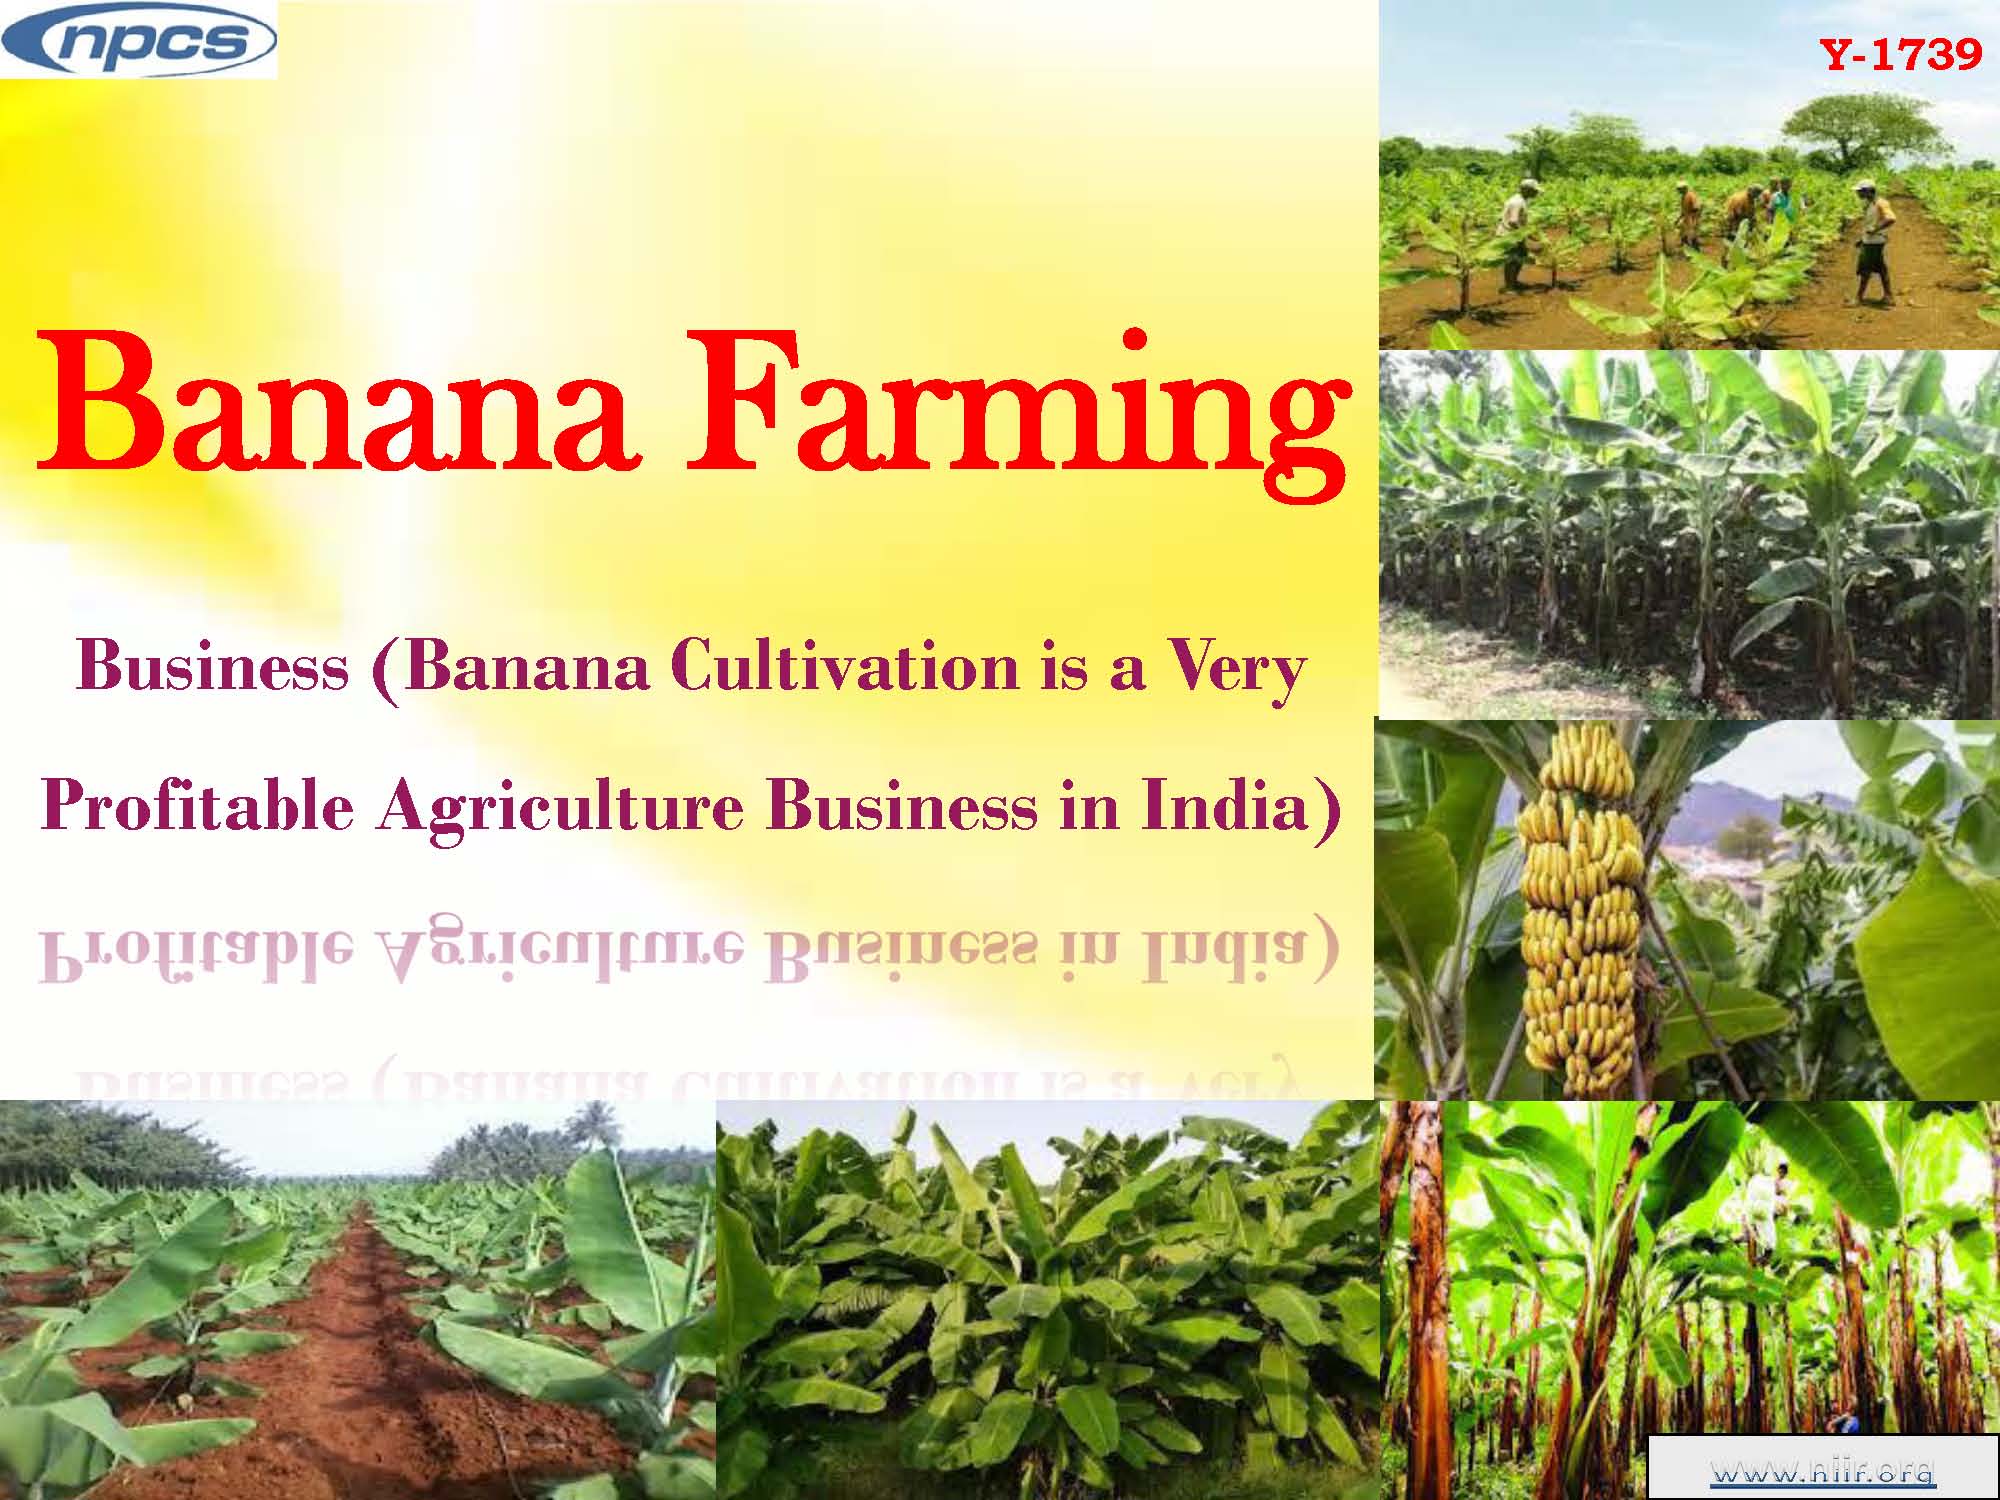 Banana Farming Business (Banana Cultivation is a Very Profitable Agriculture Business in India)